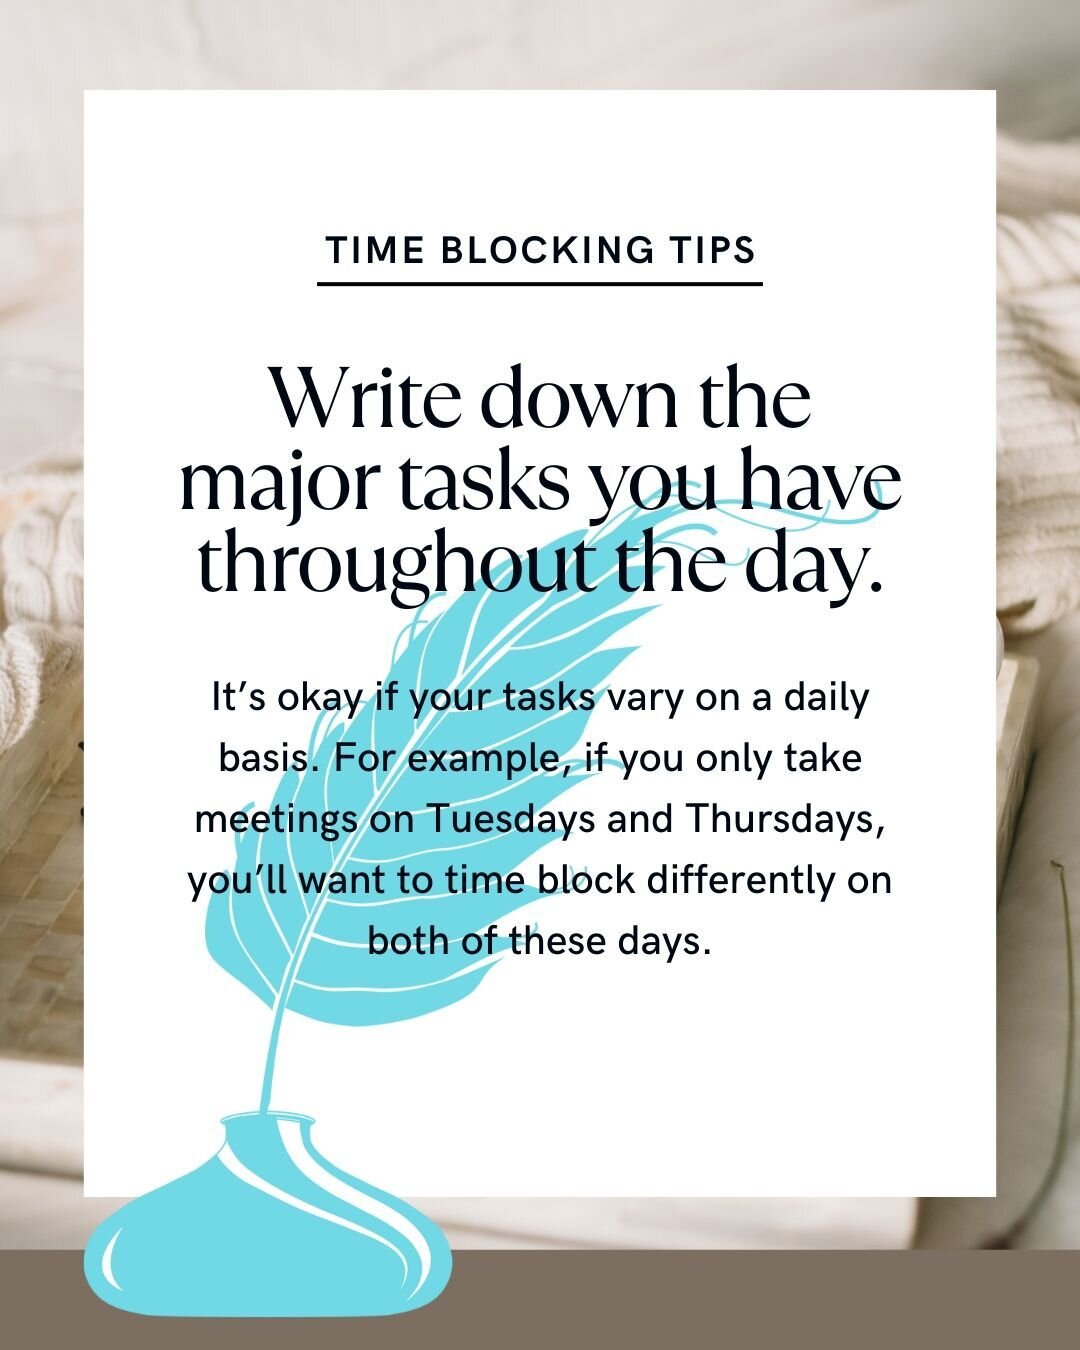 Welcome to life as an entrepreneur: your to-do list is never-ending and your unread inbox keeps growing! 🫠

If you aren't already a time-blocking convert, I'm about to put you on one of the BEST things I did for my business (and my sanity!).

🖋️Wri